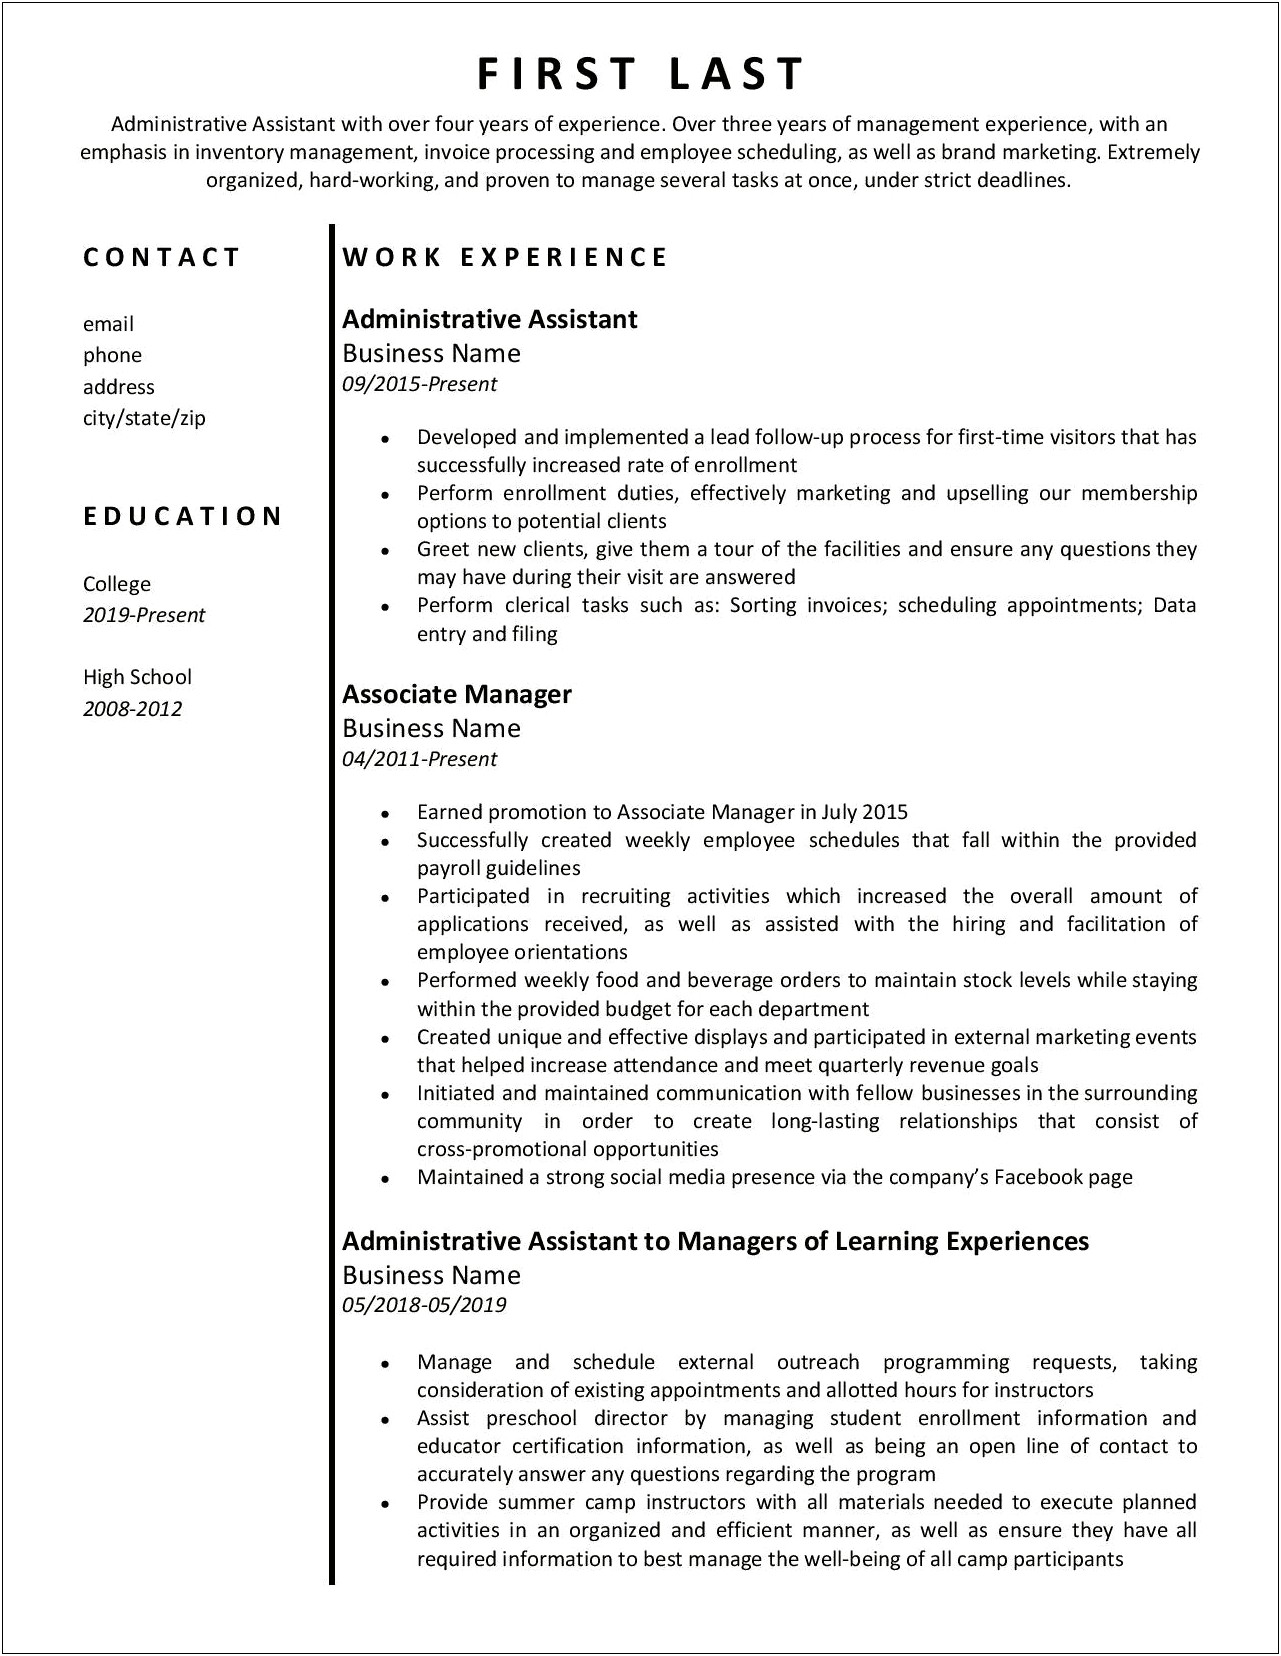 Resume Promoted But Work Throughout Positions